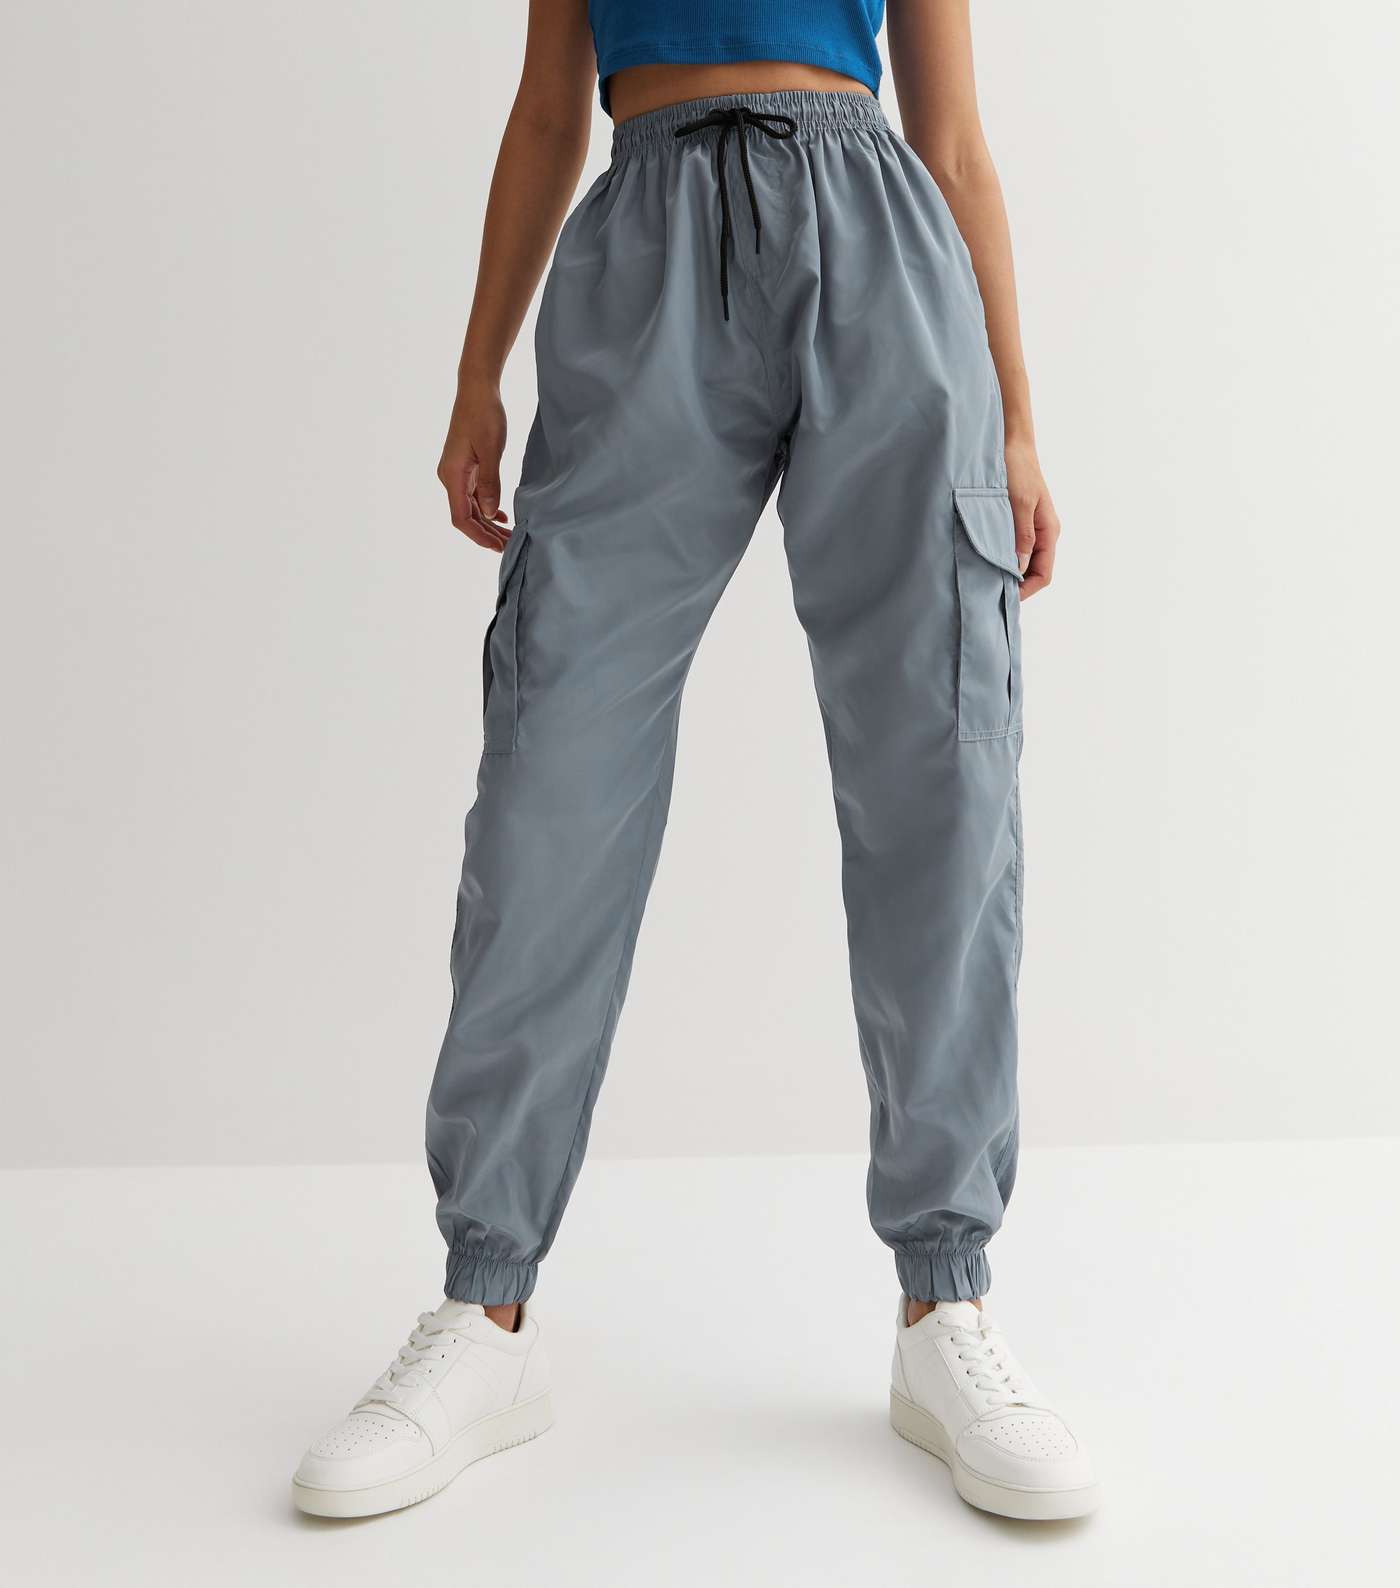 Urban Bliss Pale Grey Cuffed Parachute Cargo Trousers Image 2